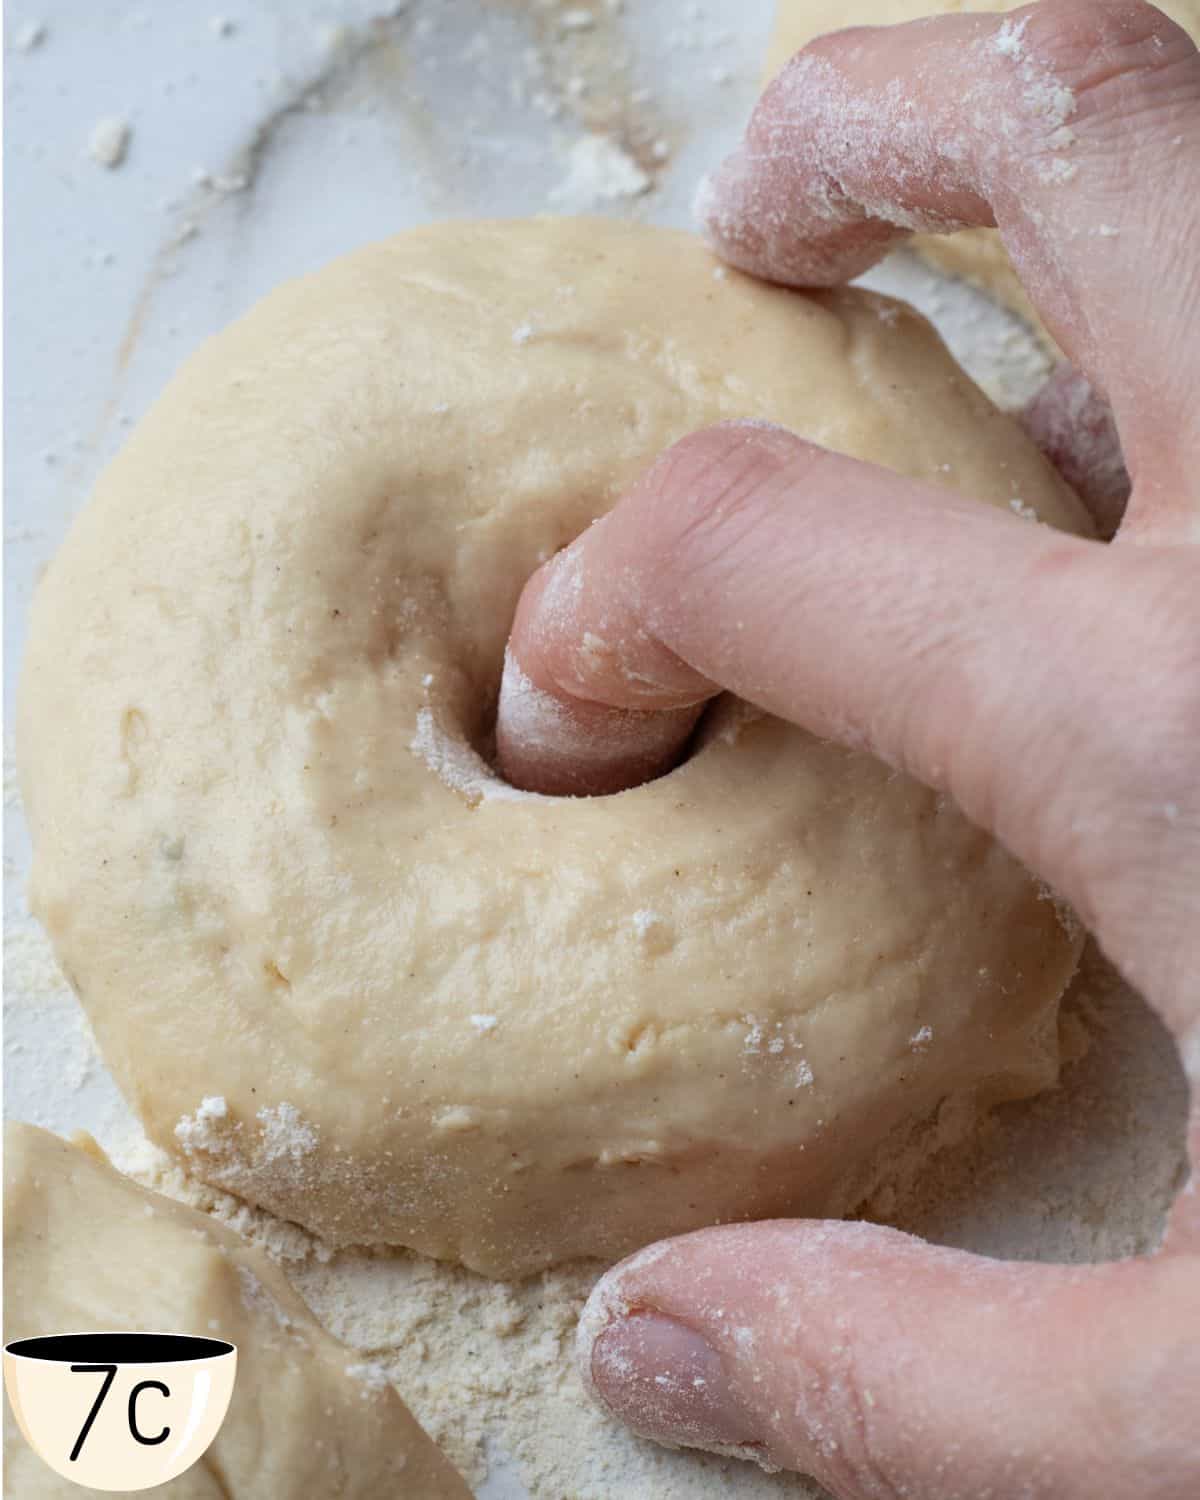 Fingers shaping a hole in the center of a gluten-free bagel dough ball on a floured surface.